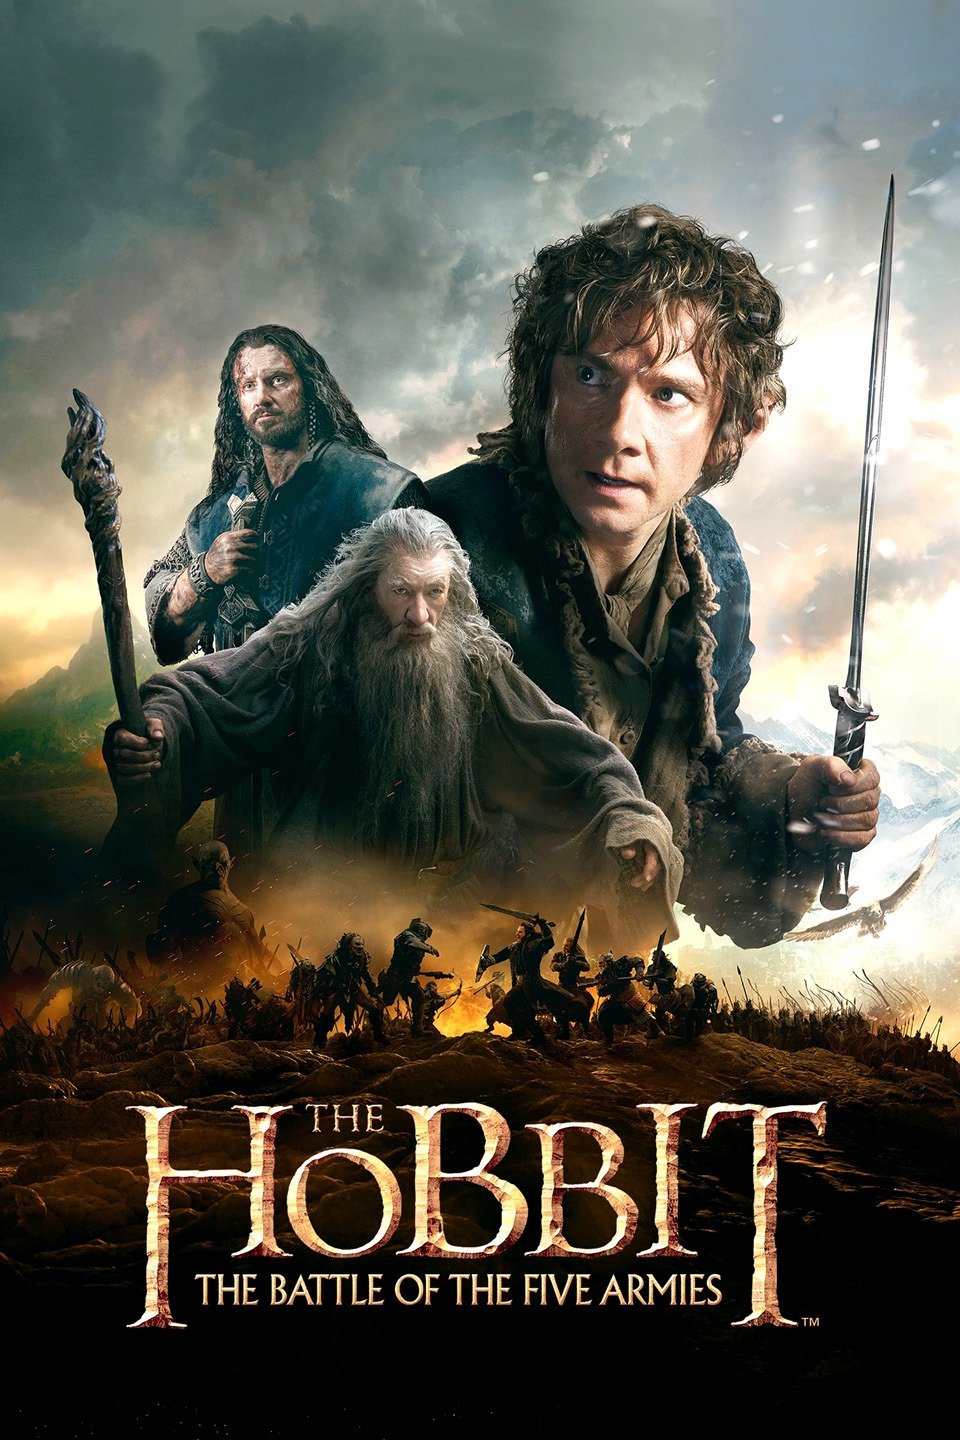 download the new version for android The Hobbit: The Battle of the Five Ar